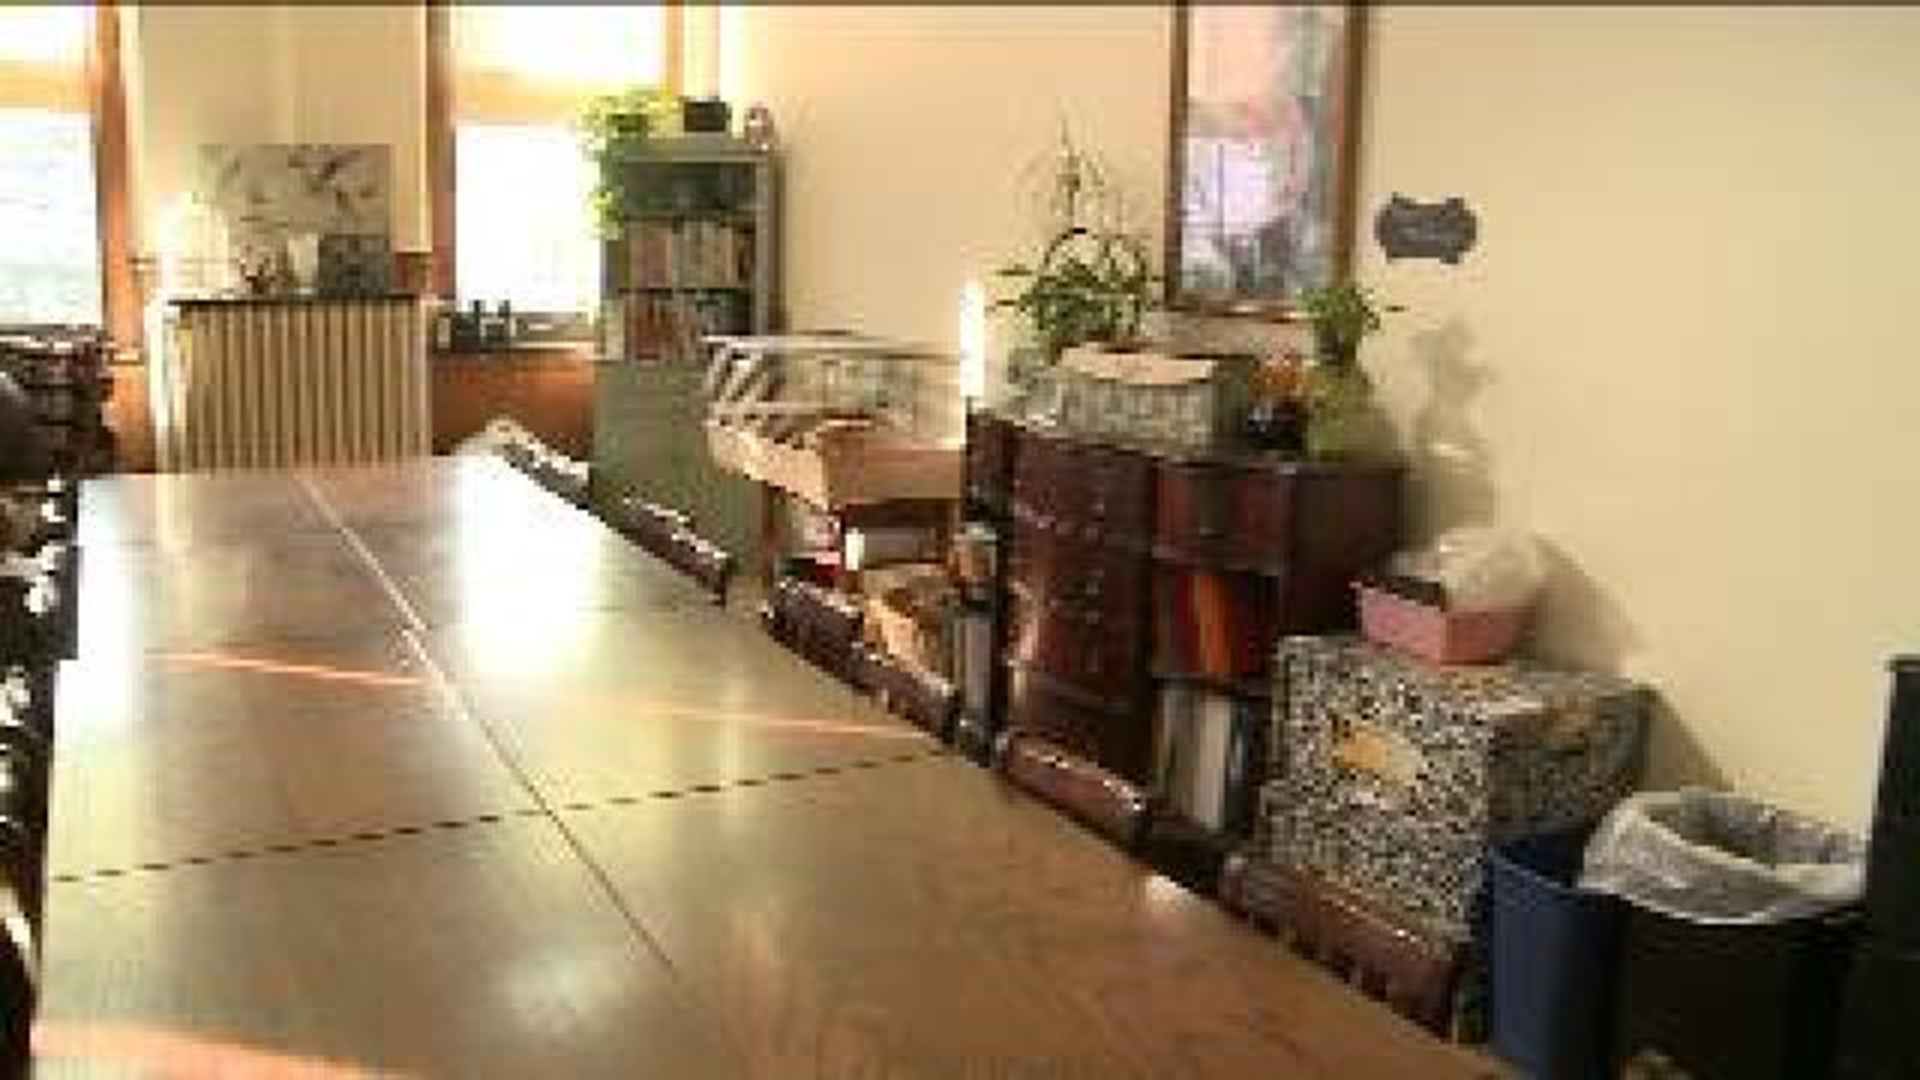 School Finds New Uses for Old Furniture